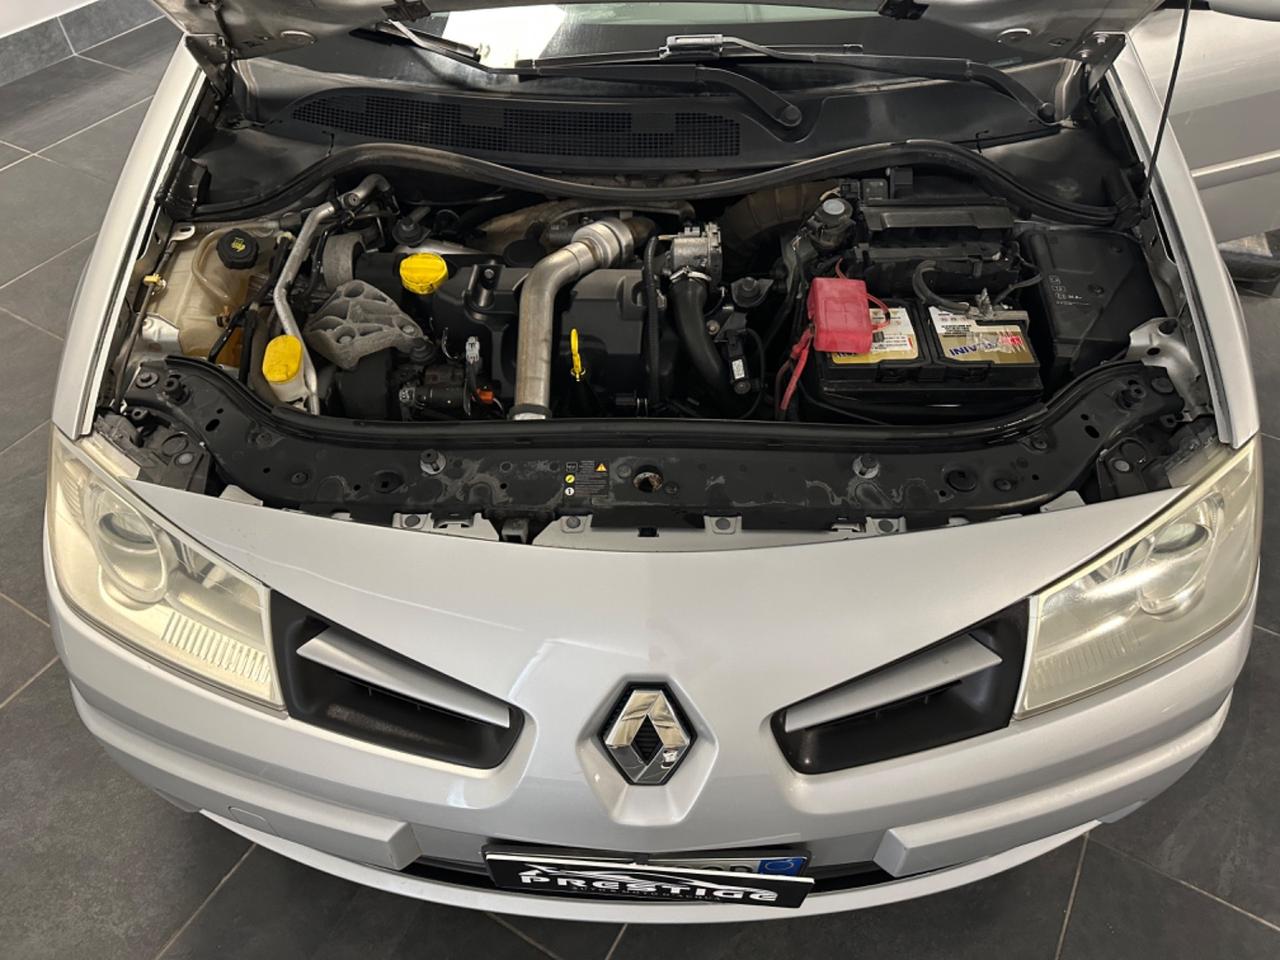 RENAULT MEGANE 1.5 DCI 105CV SPECIAL EDITION EXTREME S.W